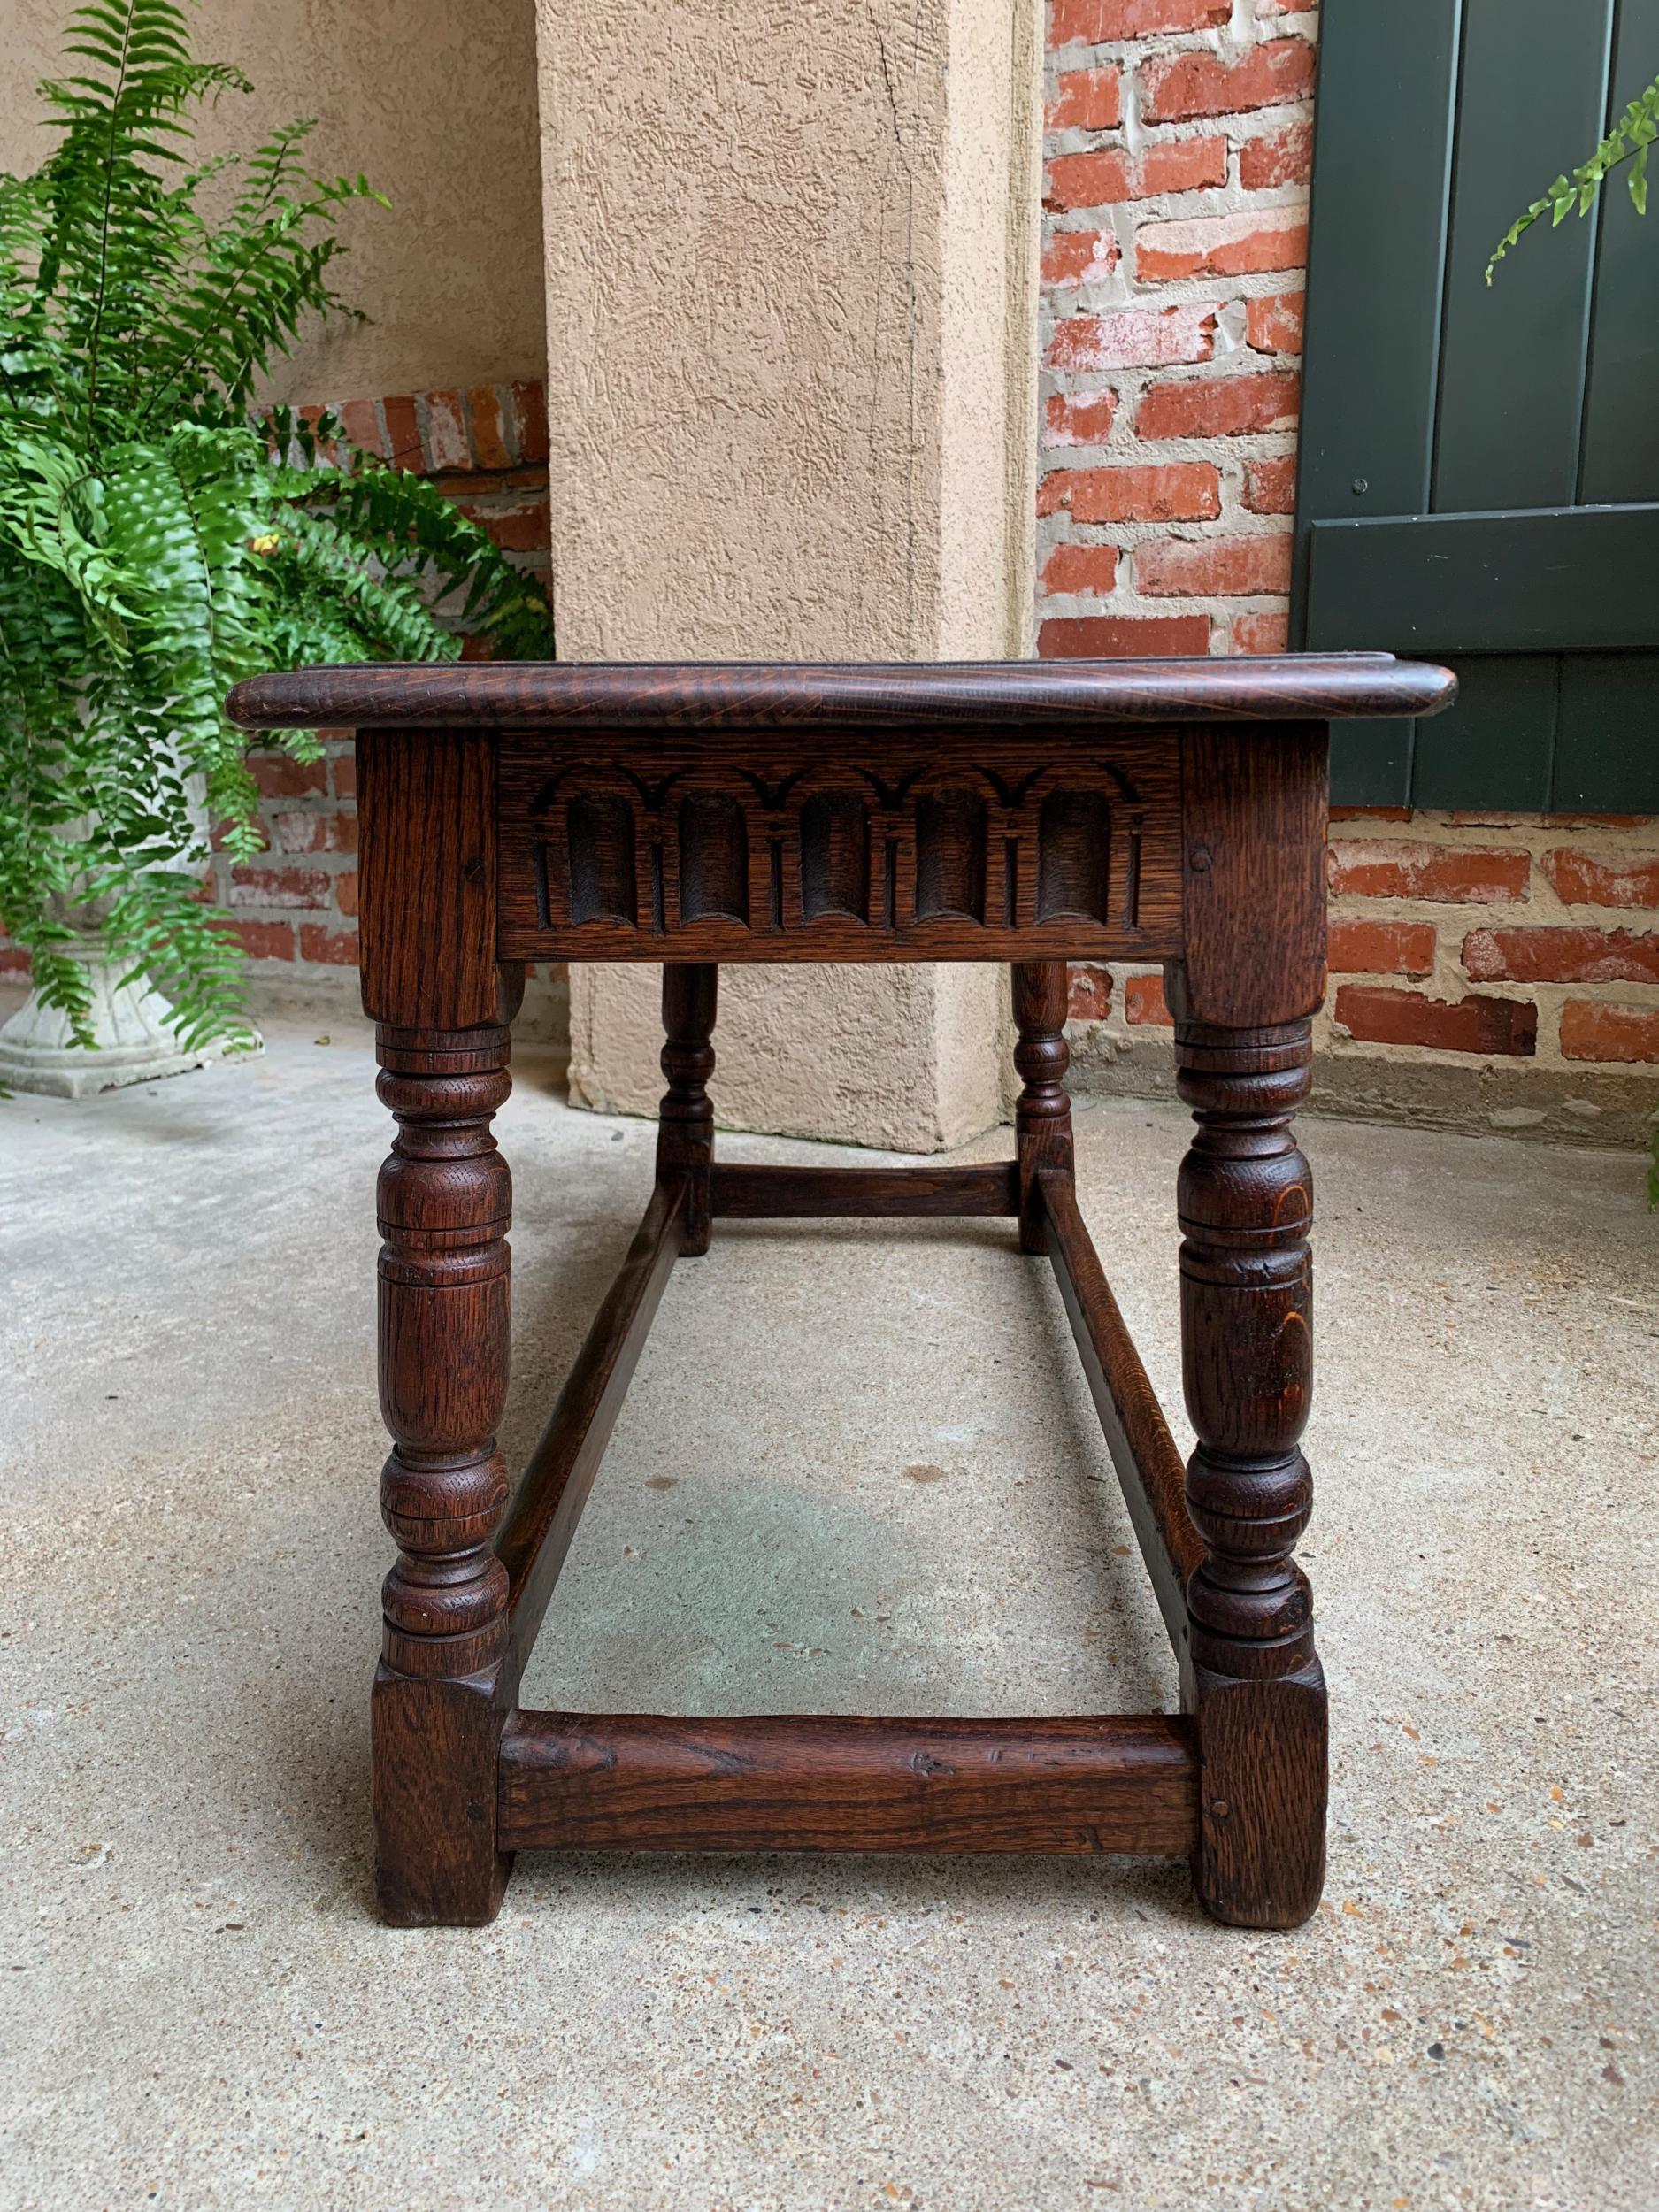 Antique English Carved Oak Pegged Joint Stool Duet Bench Window Seat, c1900 4